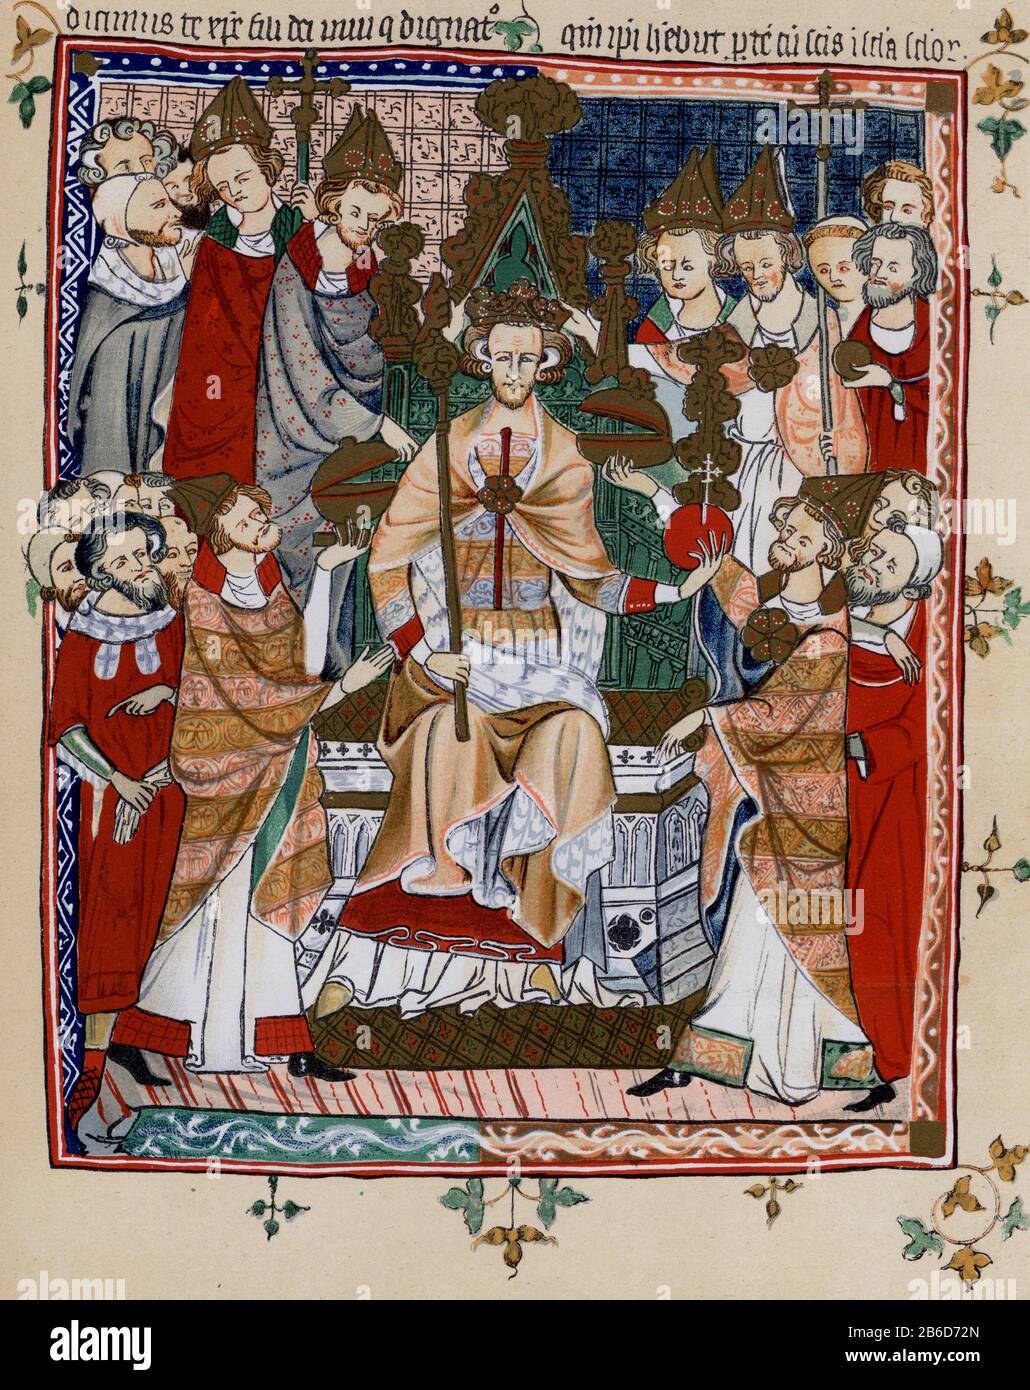 The Coronation of King Edward III, early 14th century manuscript. Edward III (1312-1377), King of England and Lord of Ireland from January 1327 until his death. He was the seventh king of the House of Plantagenet. Edward's coronation took place at Westminster Abbey on 1st February 1327 at the age of 14. Stock Photo